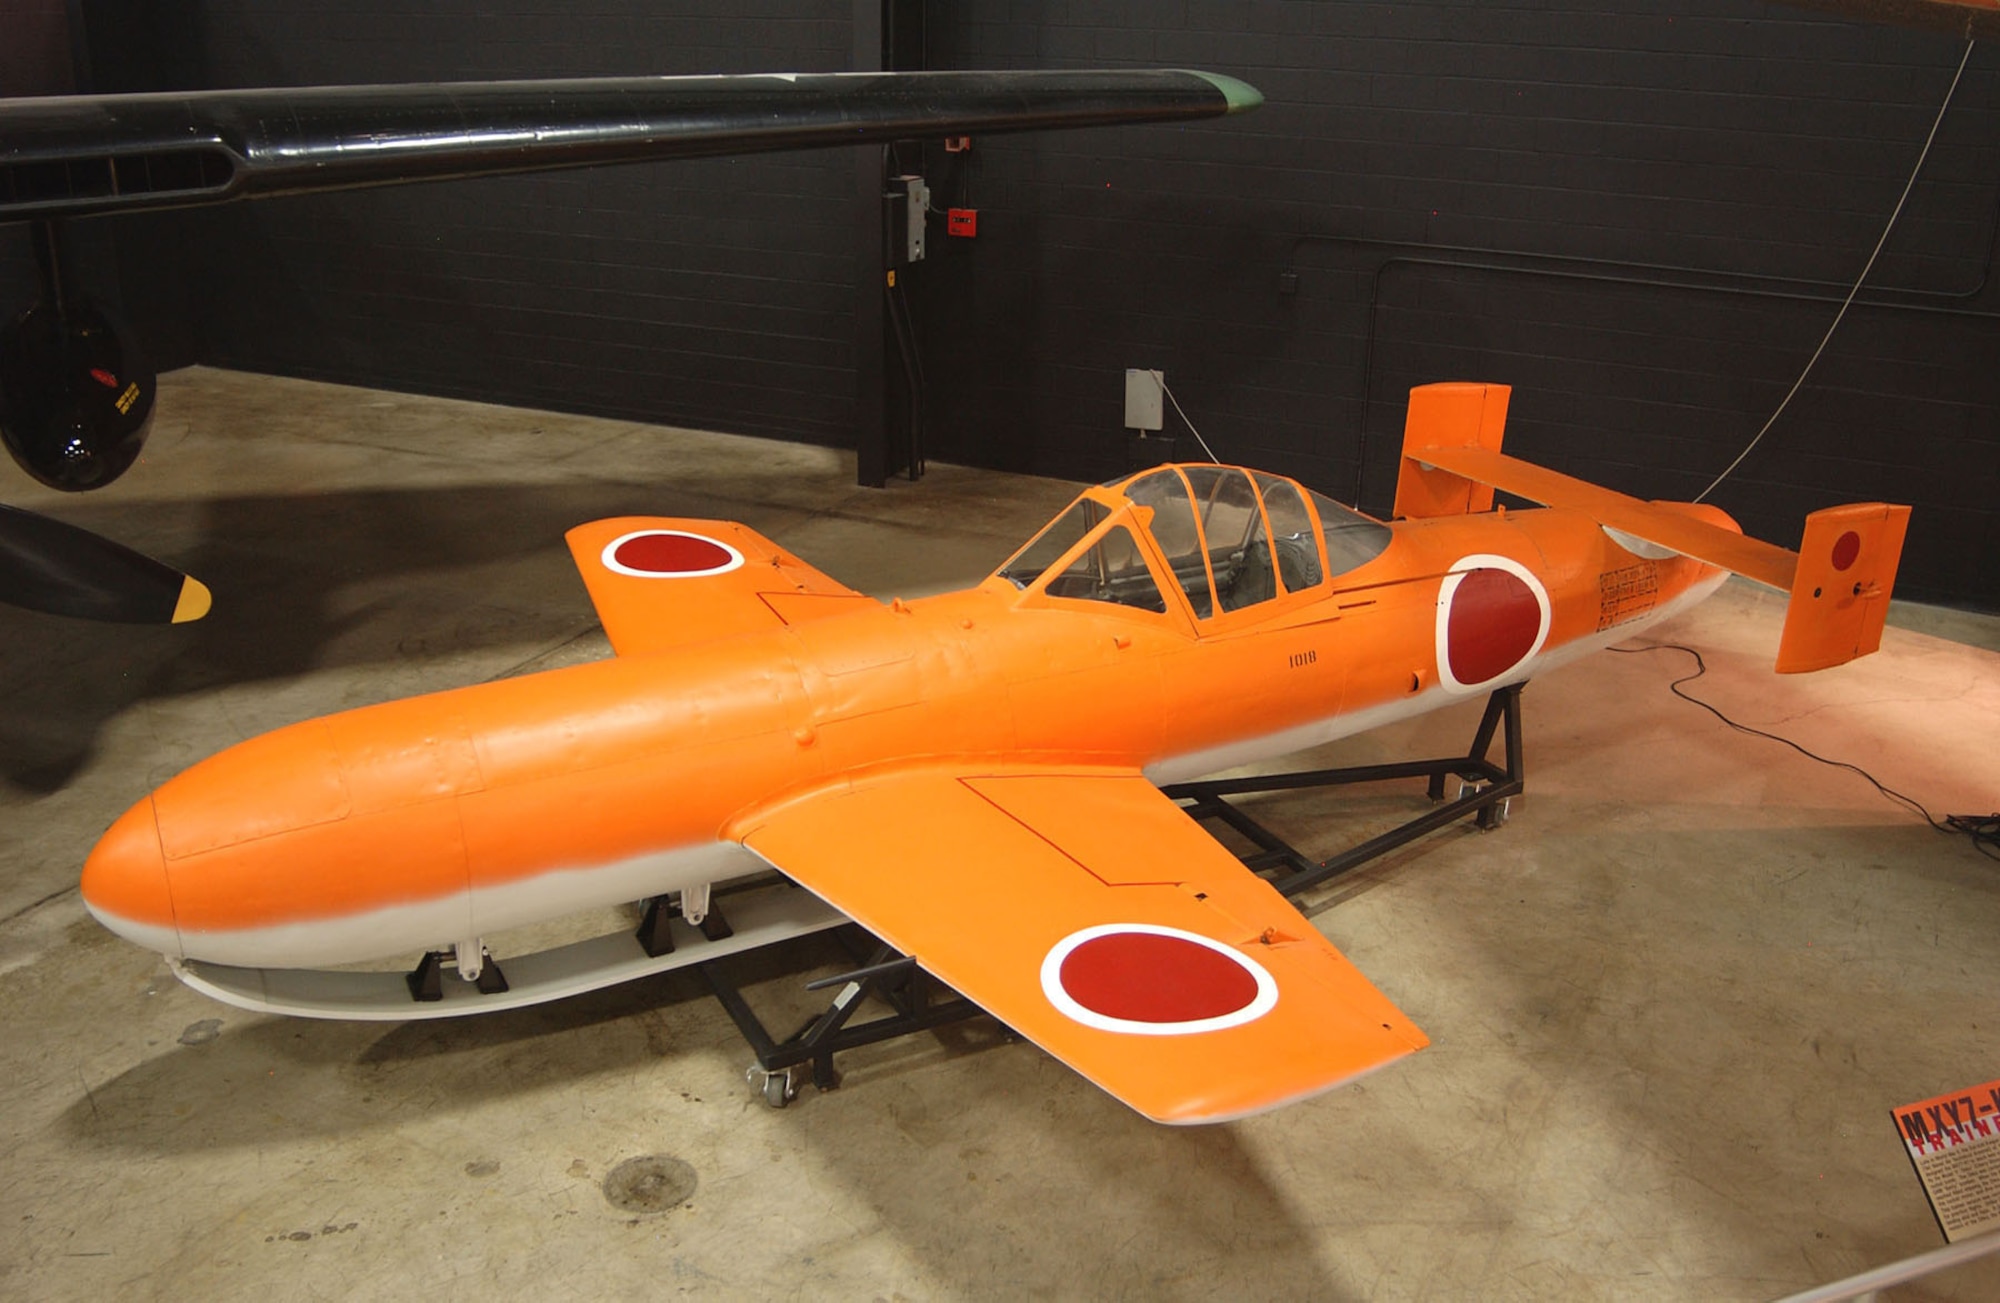 DAYTON, Ohio -- Yokosuka MXY7-K1 Ohka Trainer in the World War II Gallery at the National Museum of the United States Air Force. (U.S. Air Force photo)